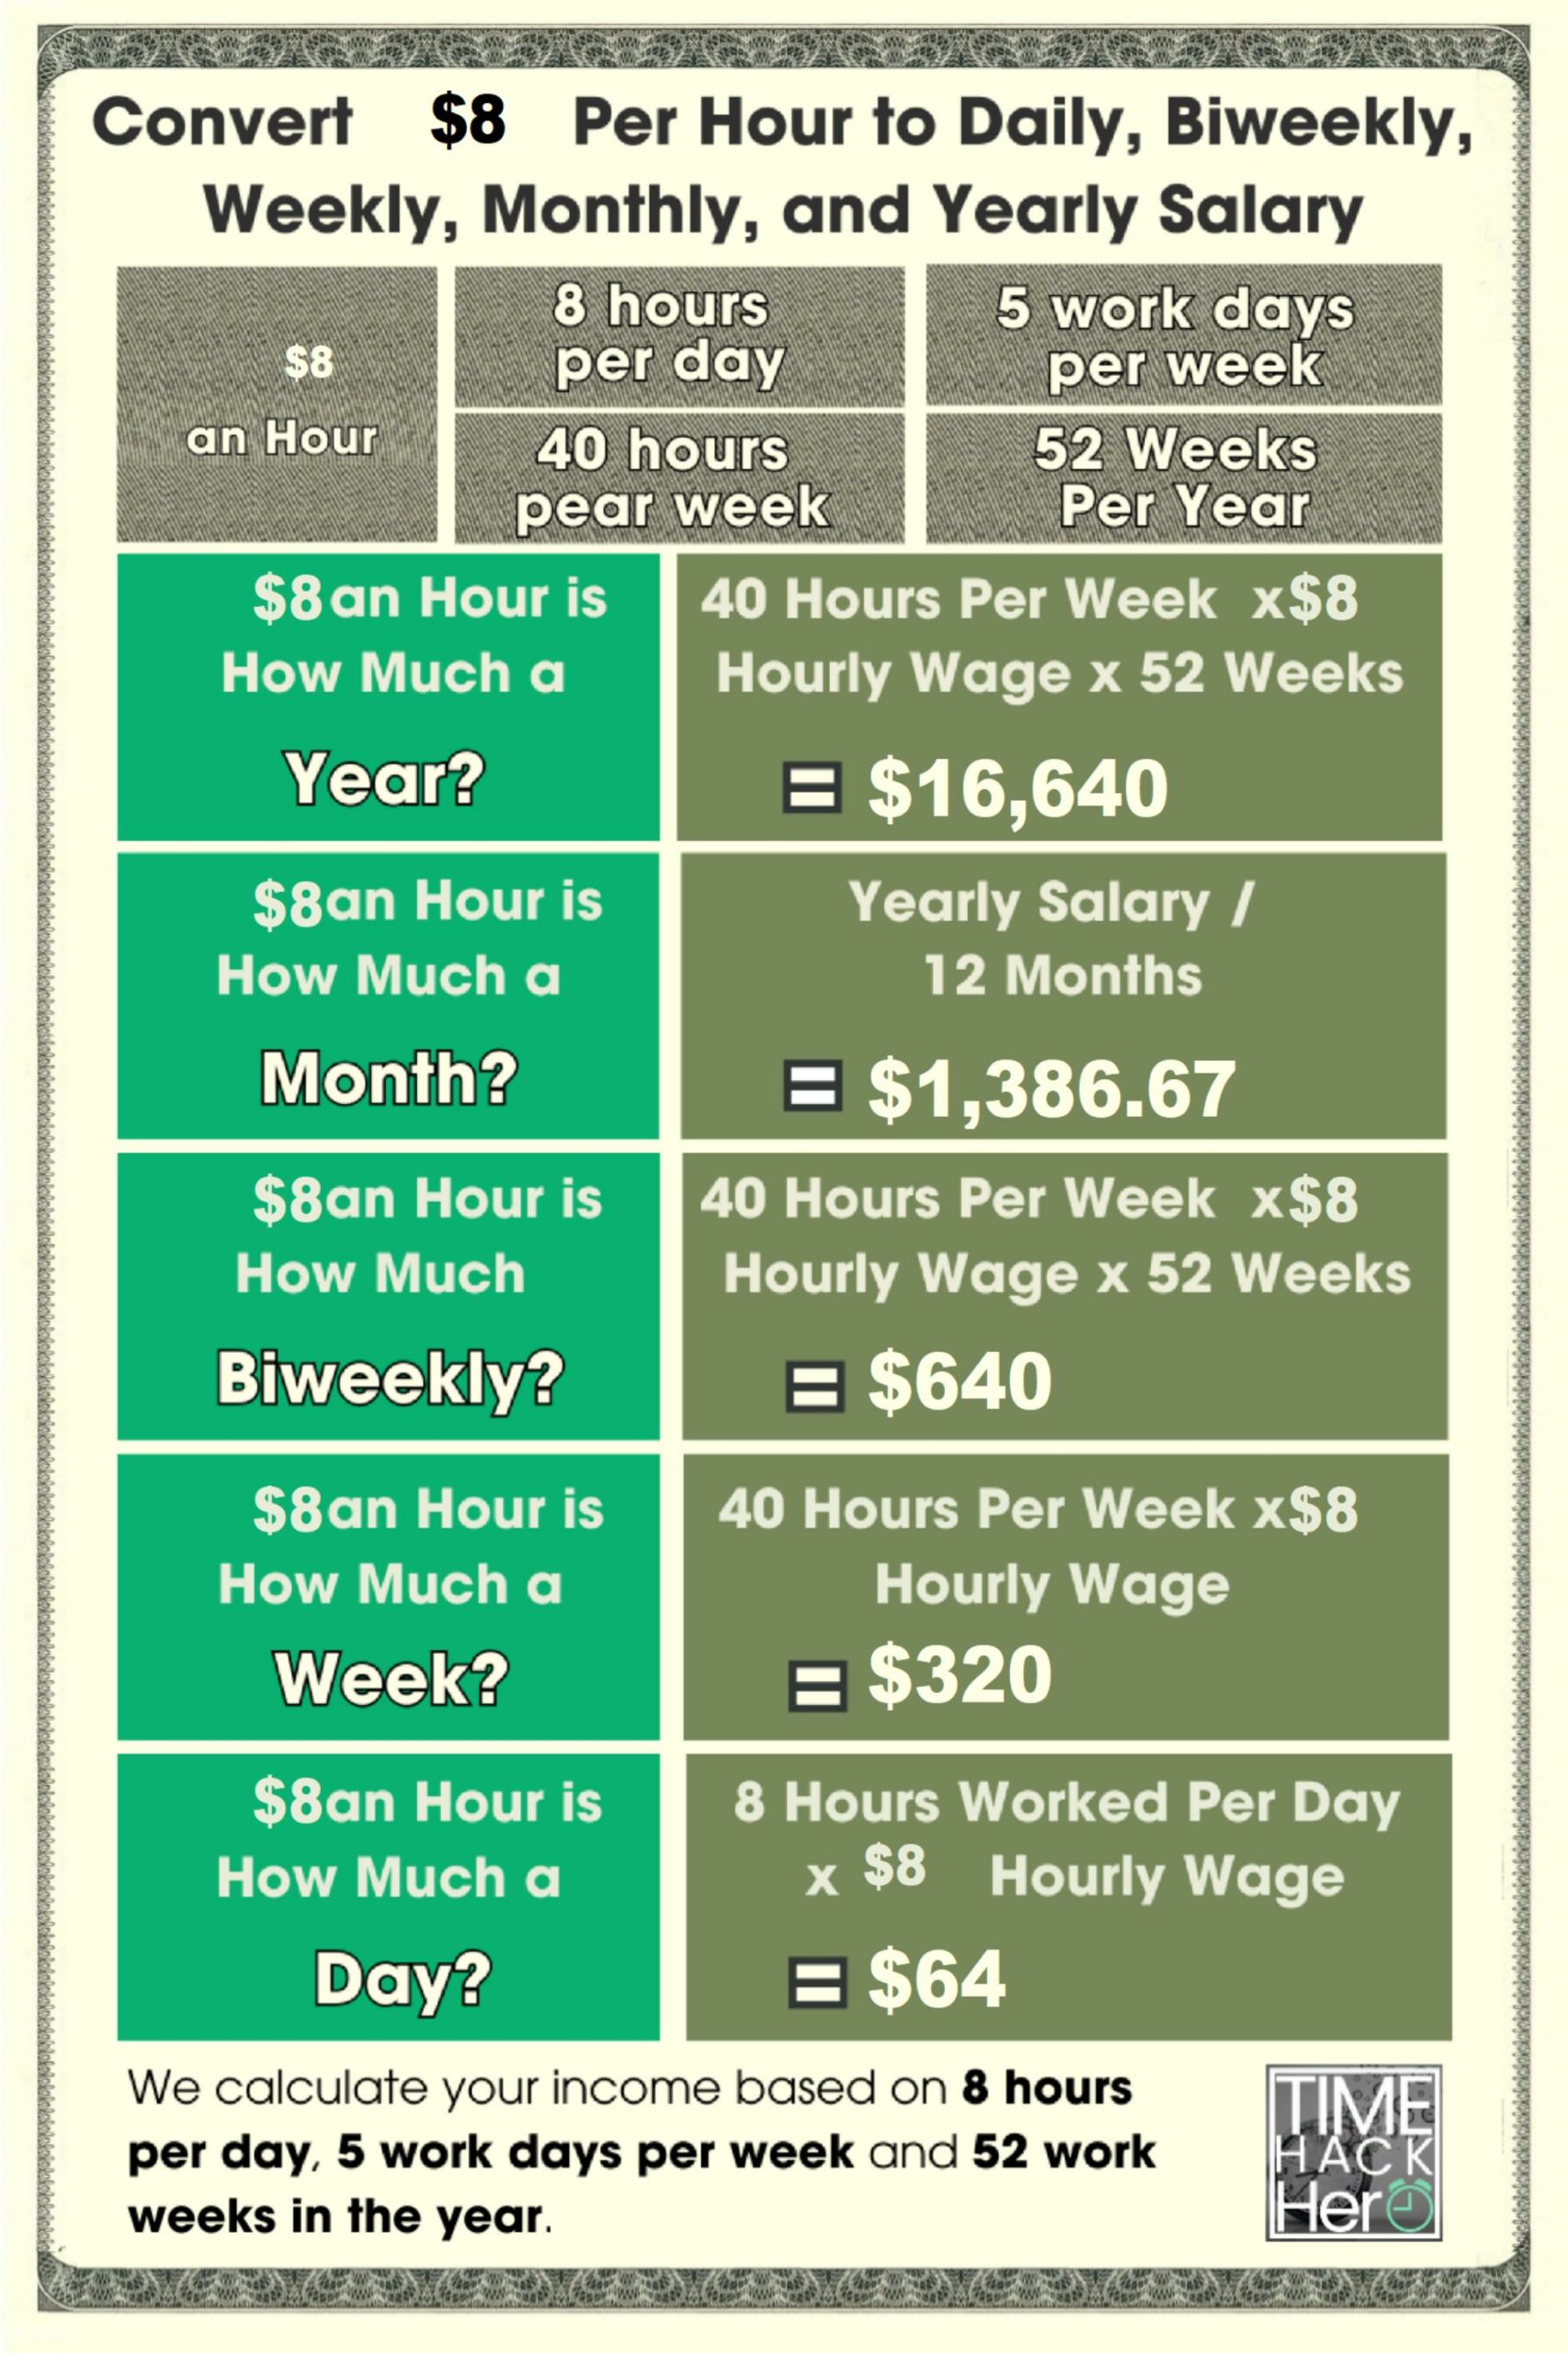 Convert $8 Per Hour to Weekly, Monthly, and Yearly Salary